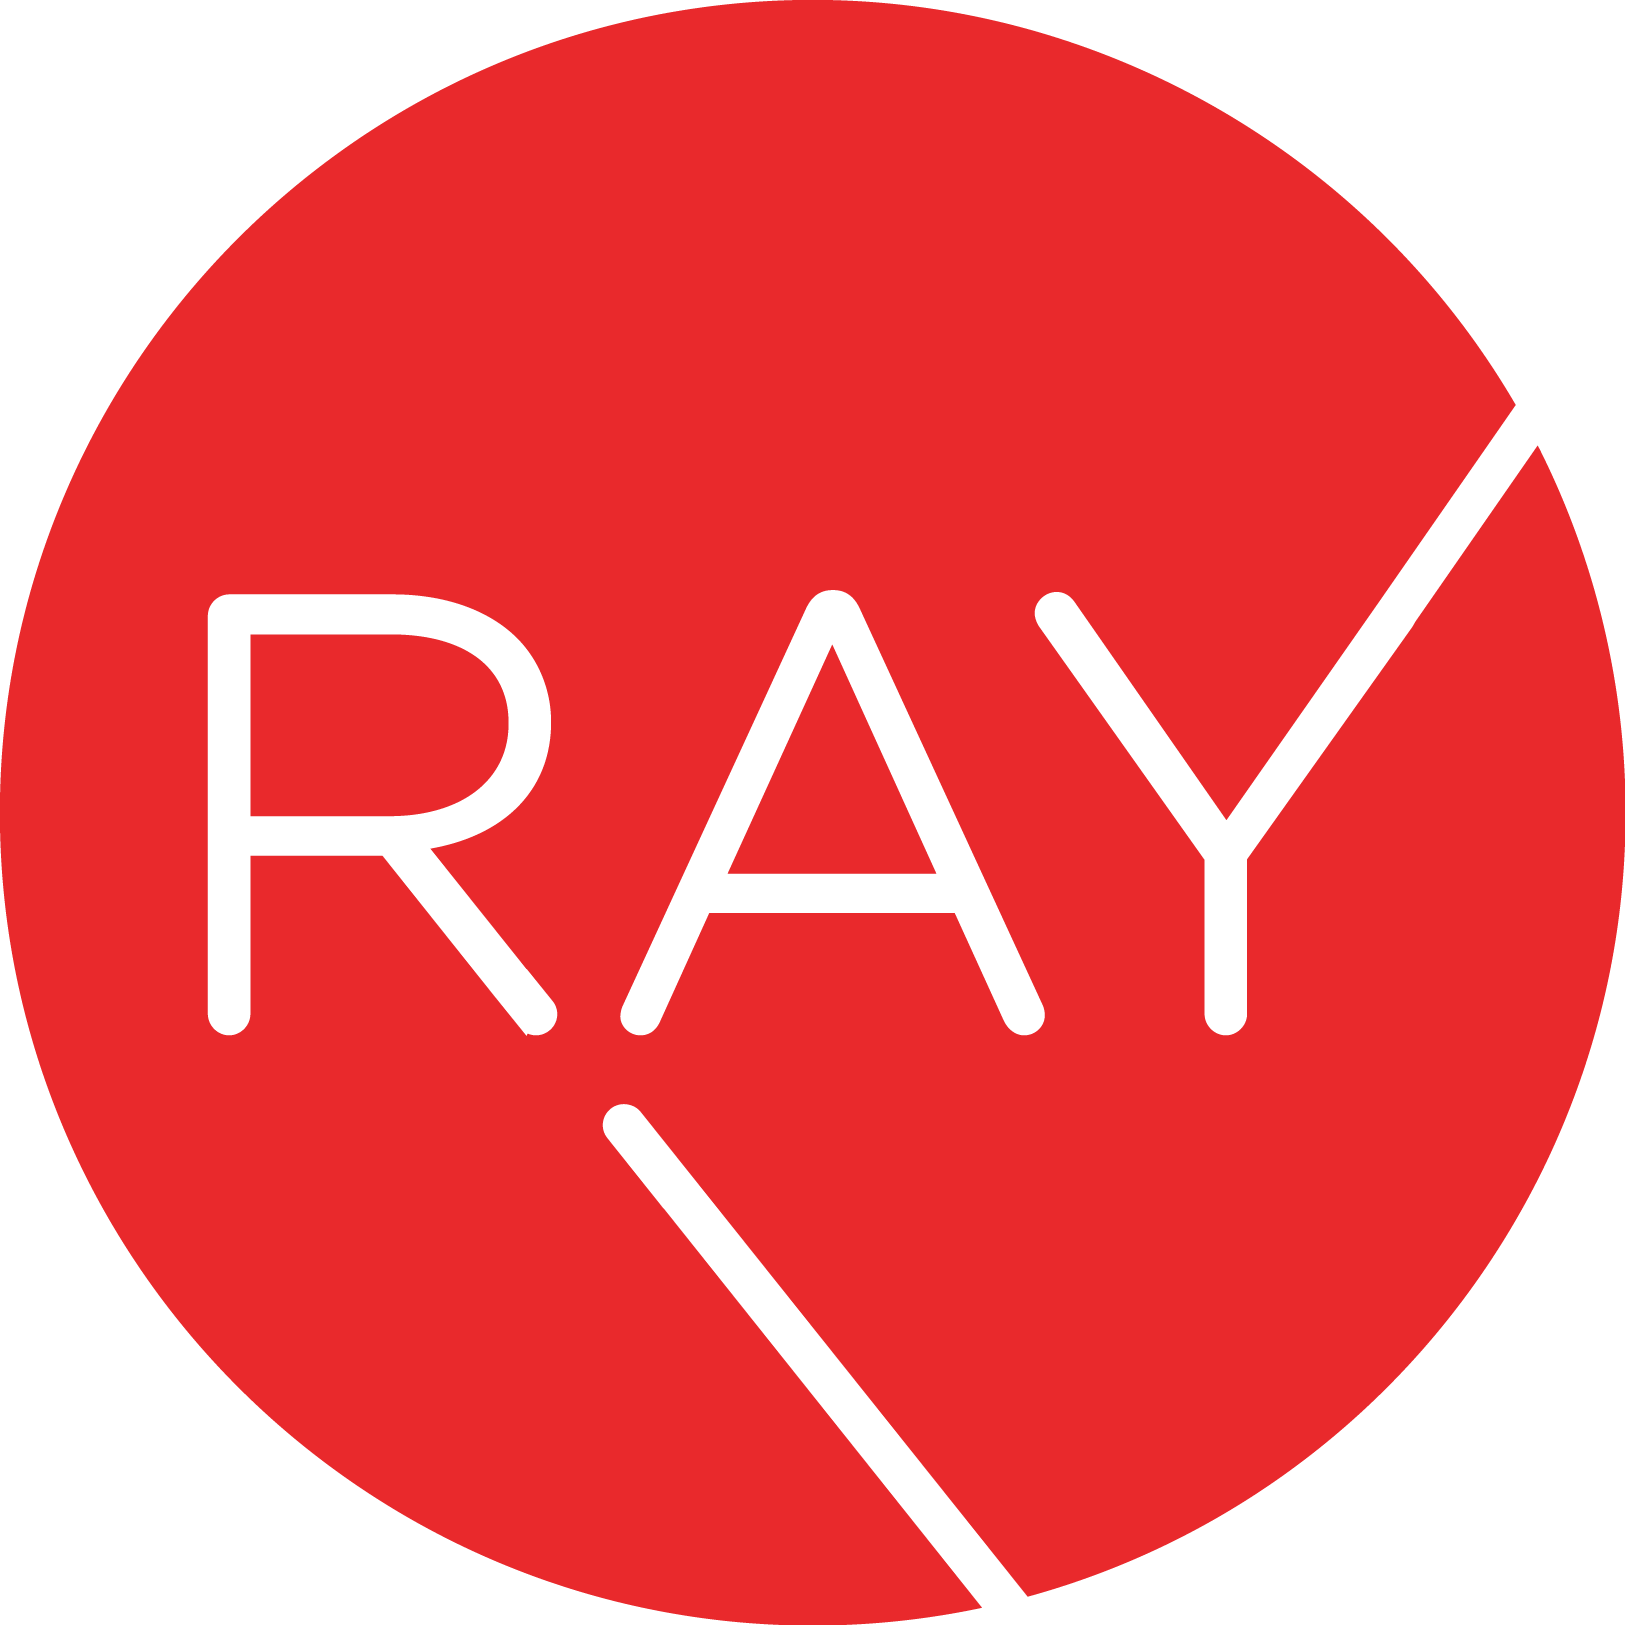 This is the official Twitter profile for Ray Apartments. | (206) 632-9000 | ray@greystar.com
https://t.co/eWKfMPARP4